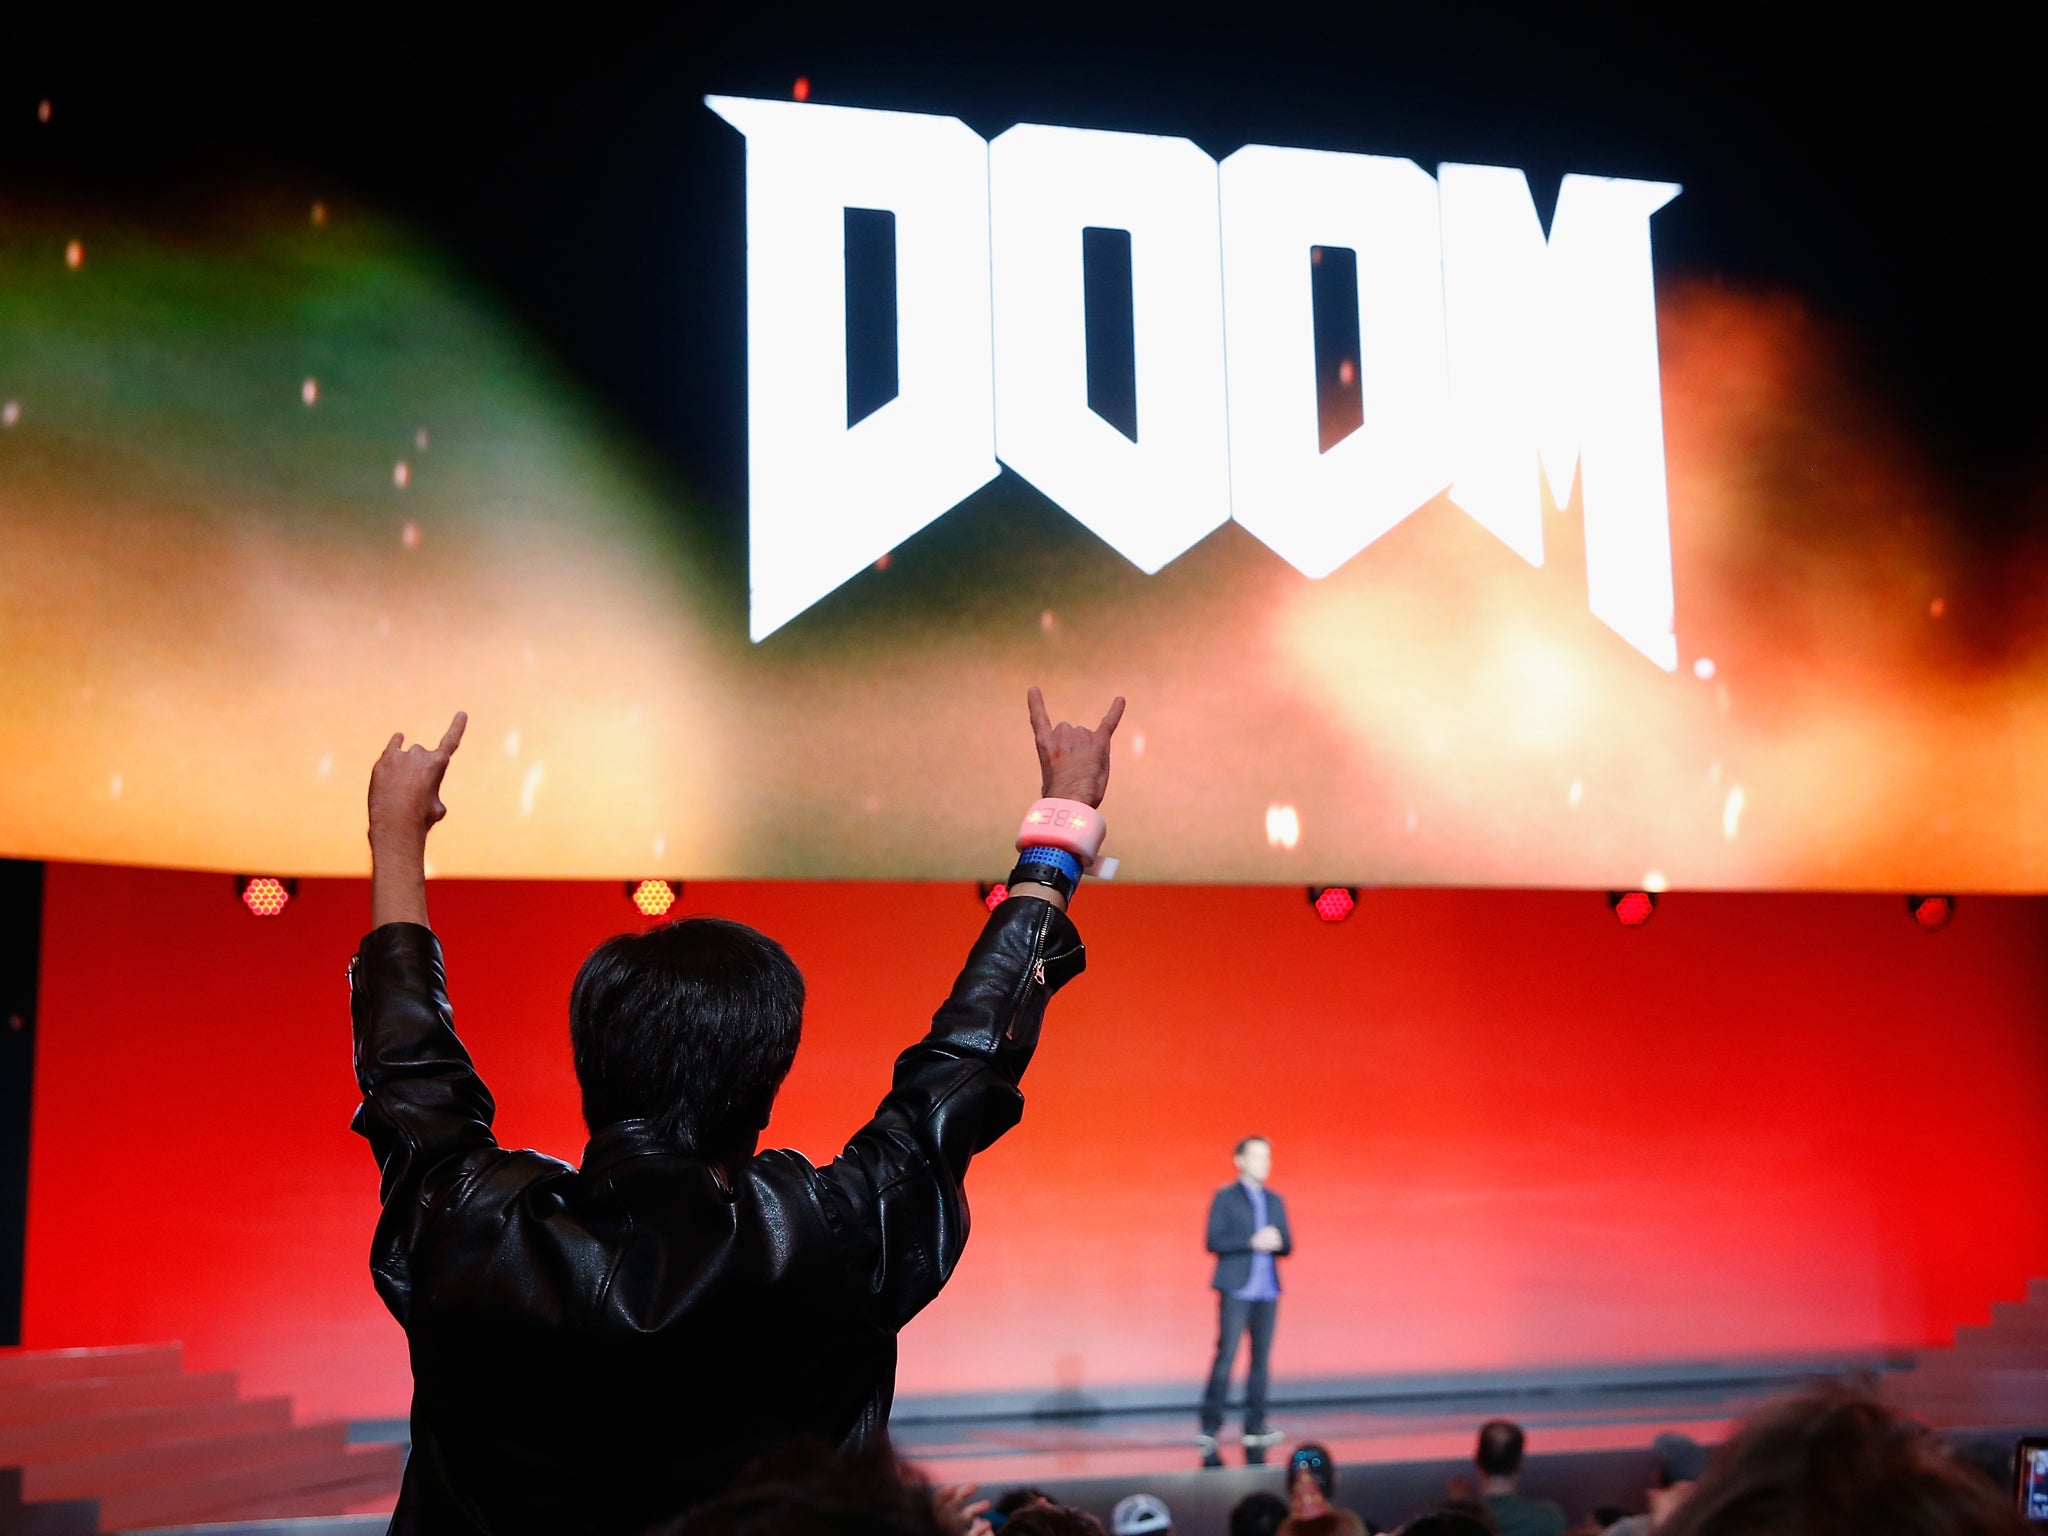 Fans cheer for Executive Producer for Id Software, Marty Stratton as he speaks about 'Doom' during the Bethesda E3 2015 press conference at the Dolby Theatre on June 14, 2015 in Los Angeles, California